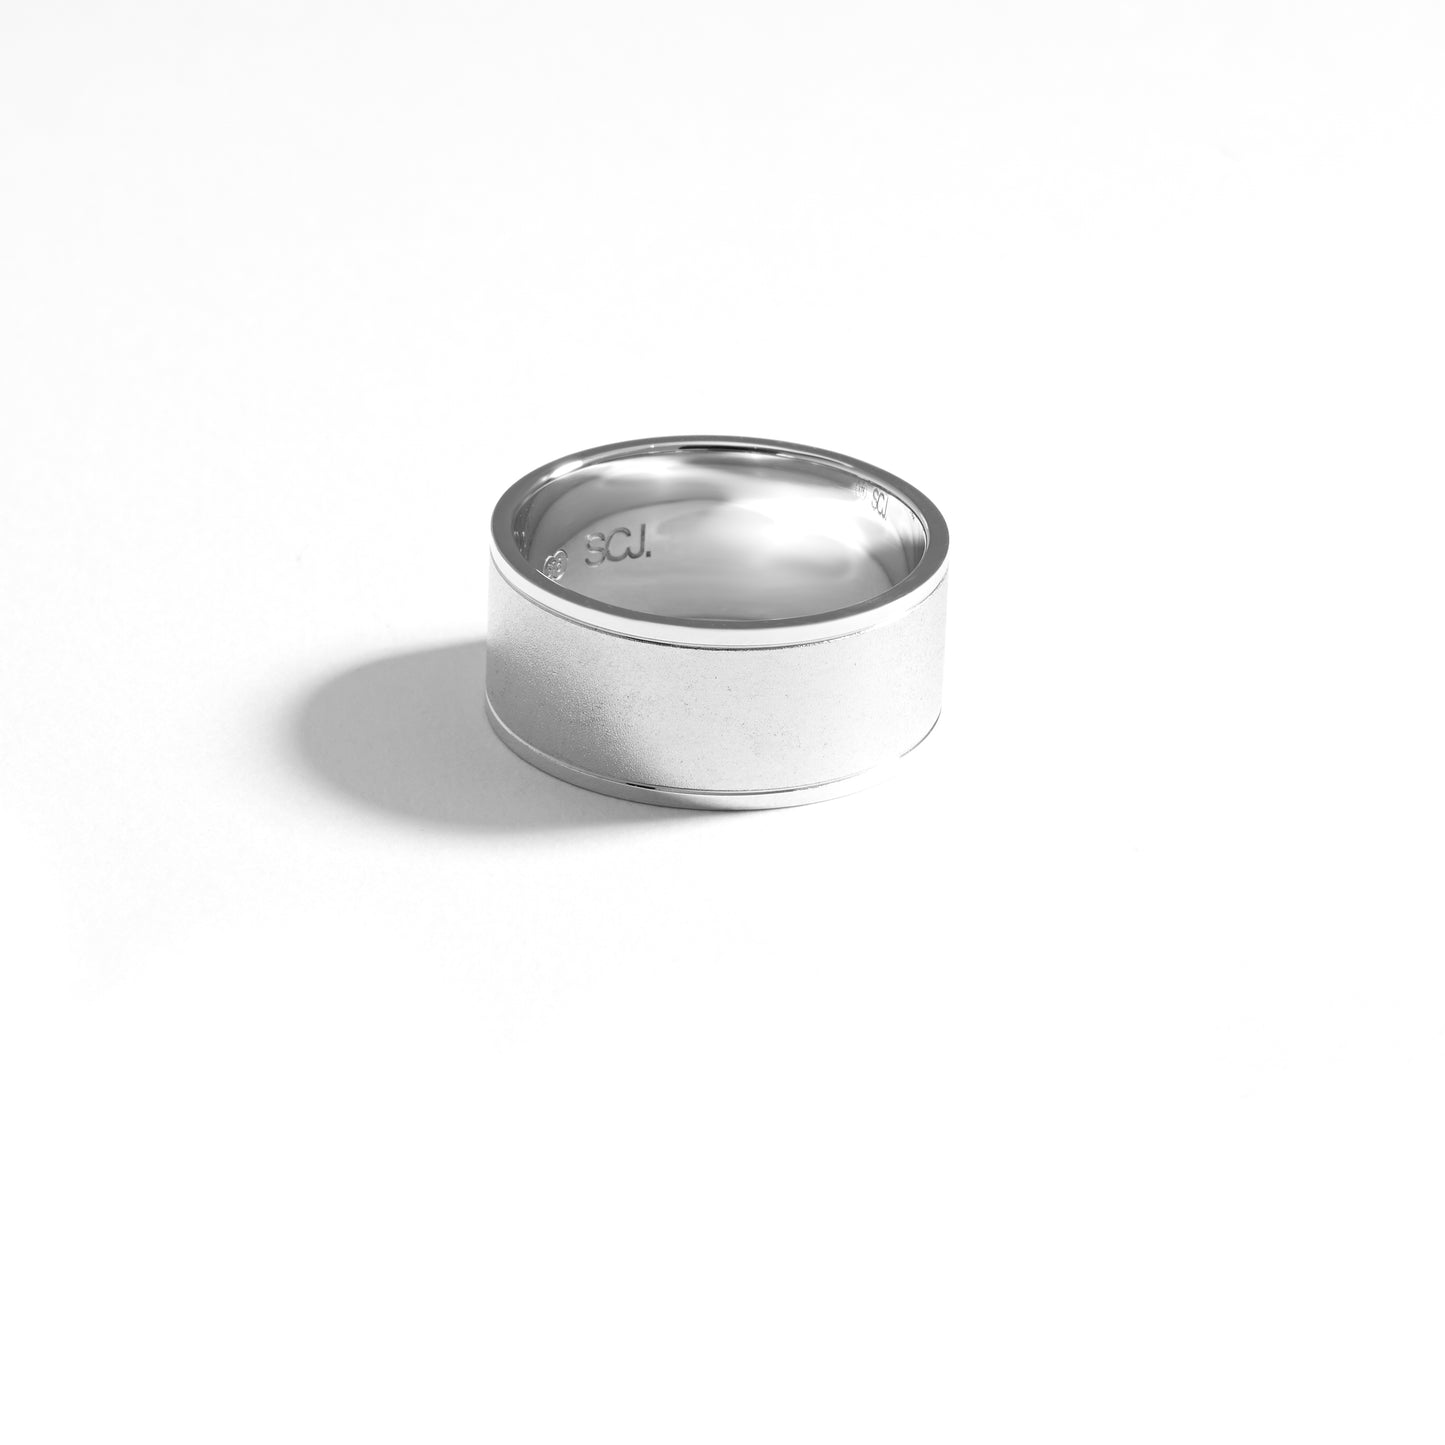 9K White Gold Matte Finish Centre and Polished Edge Band Ring 10mm